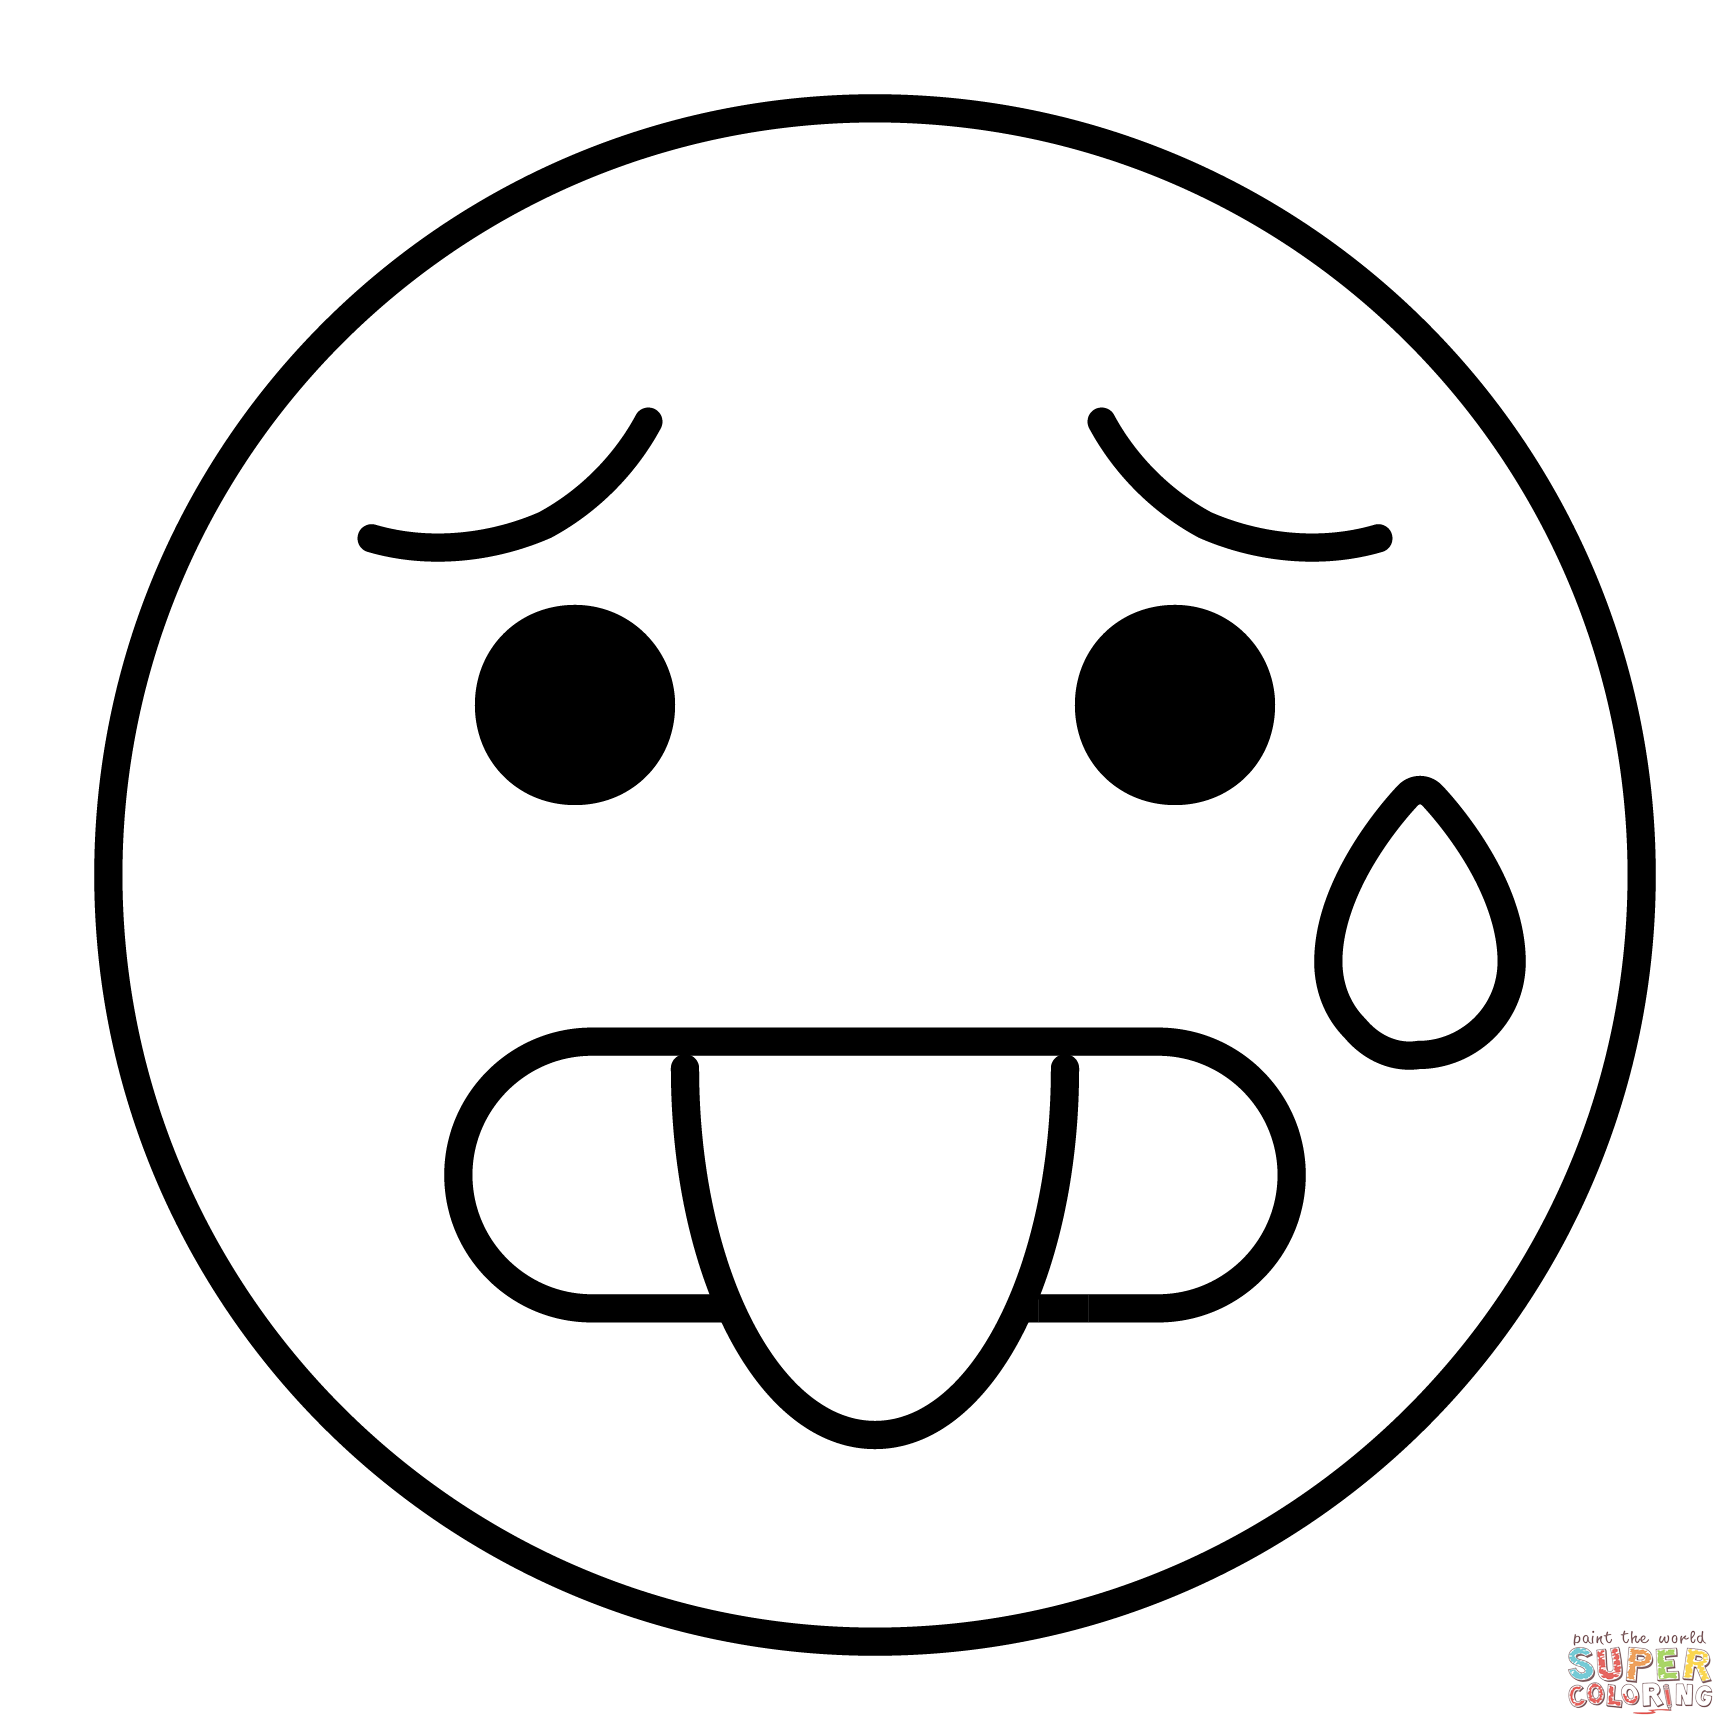 Hot face emoji coloring page free printable coloring pages